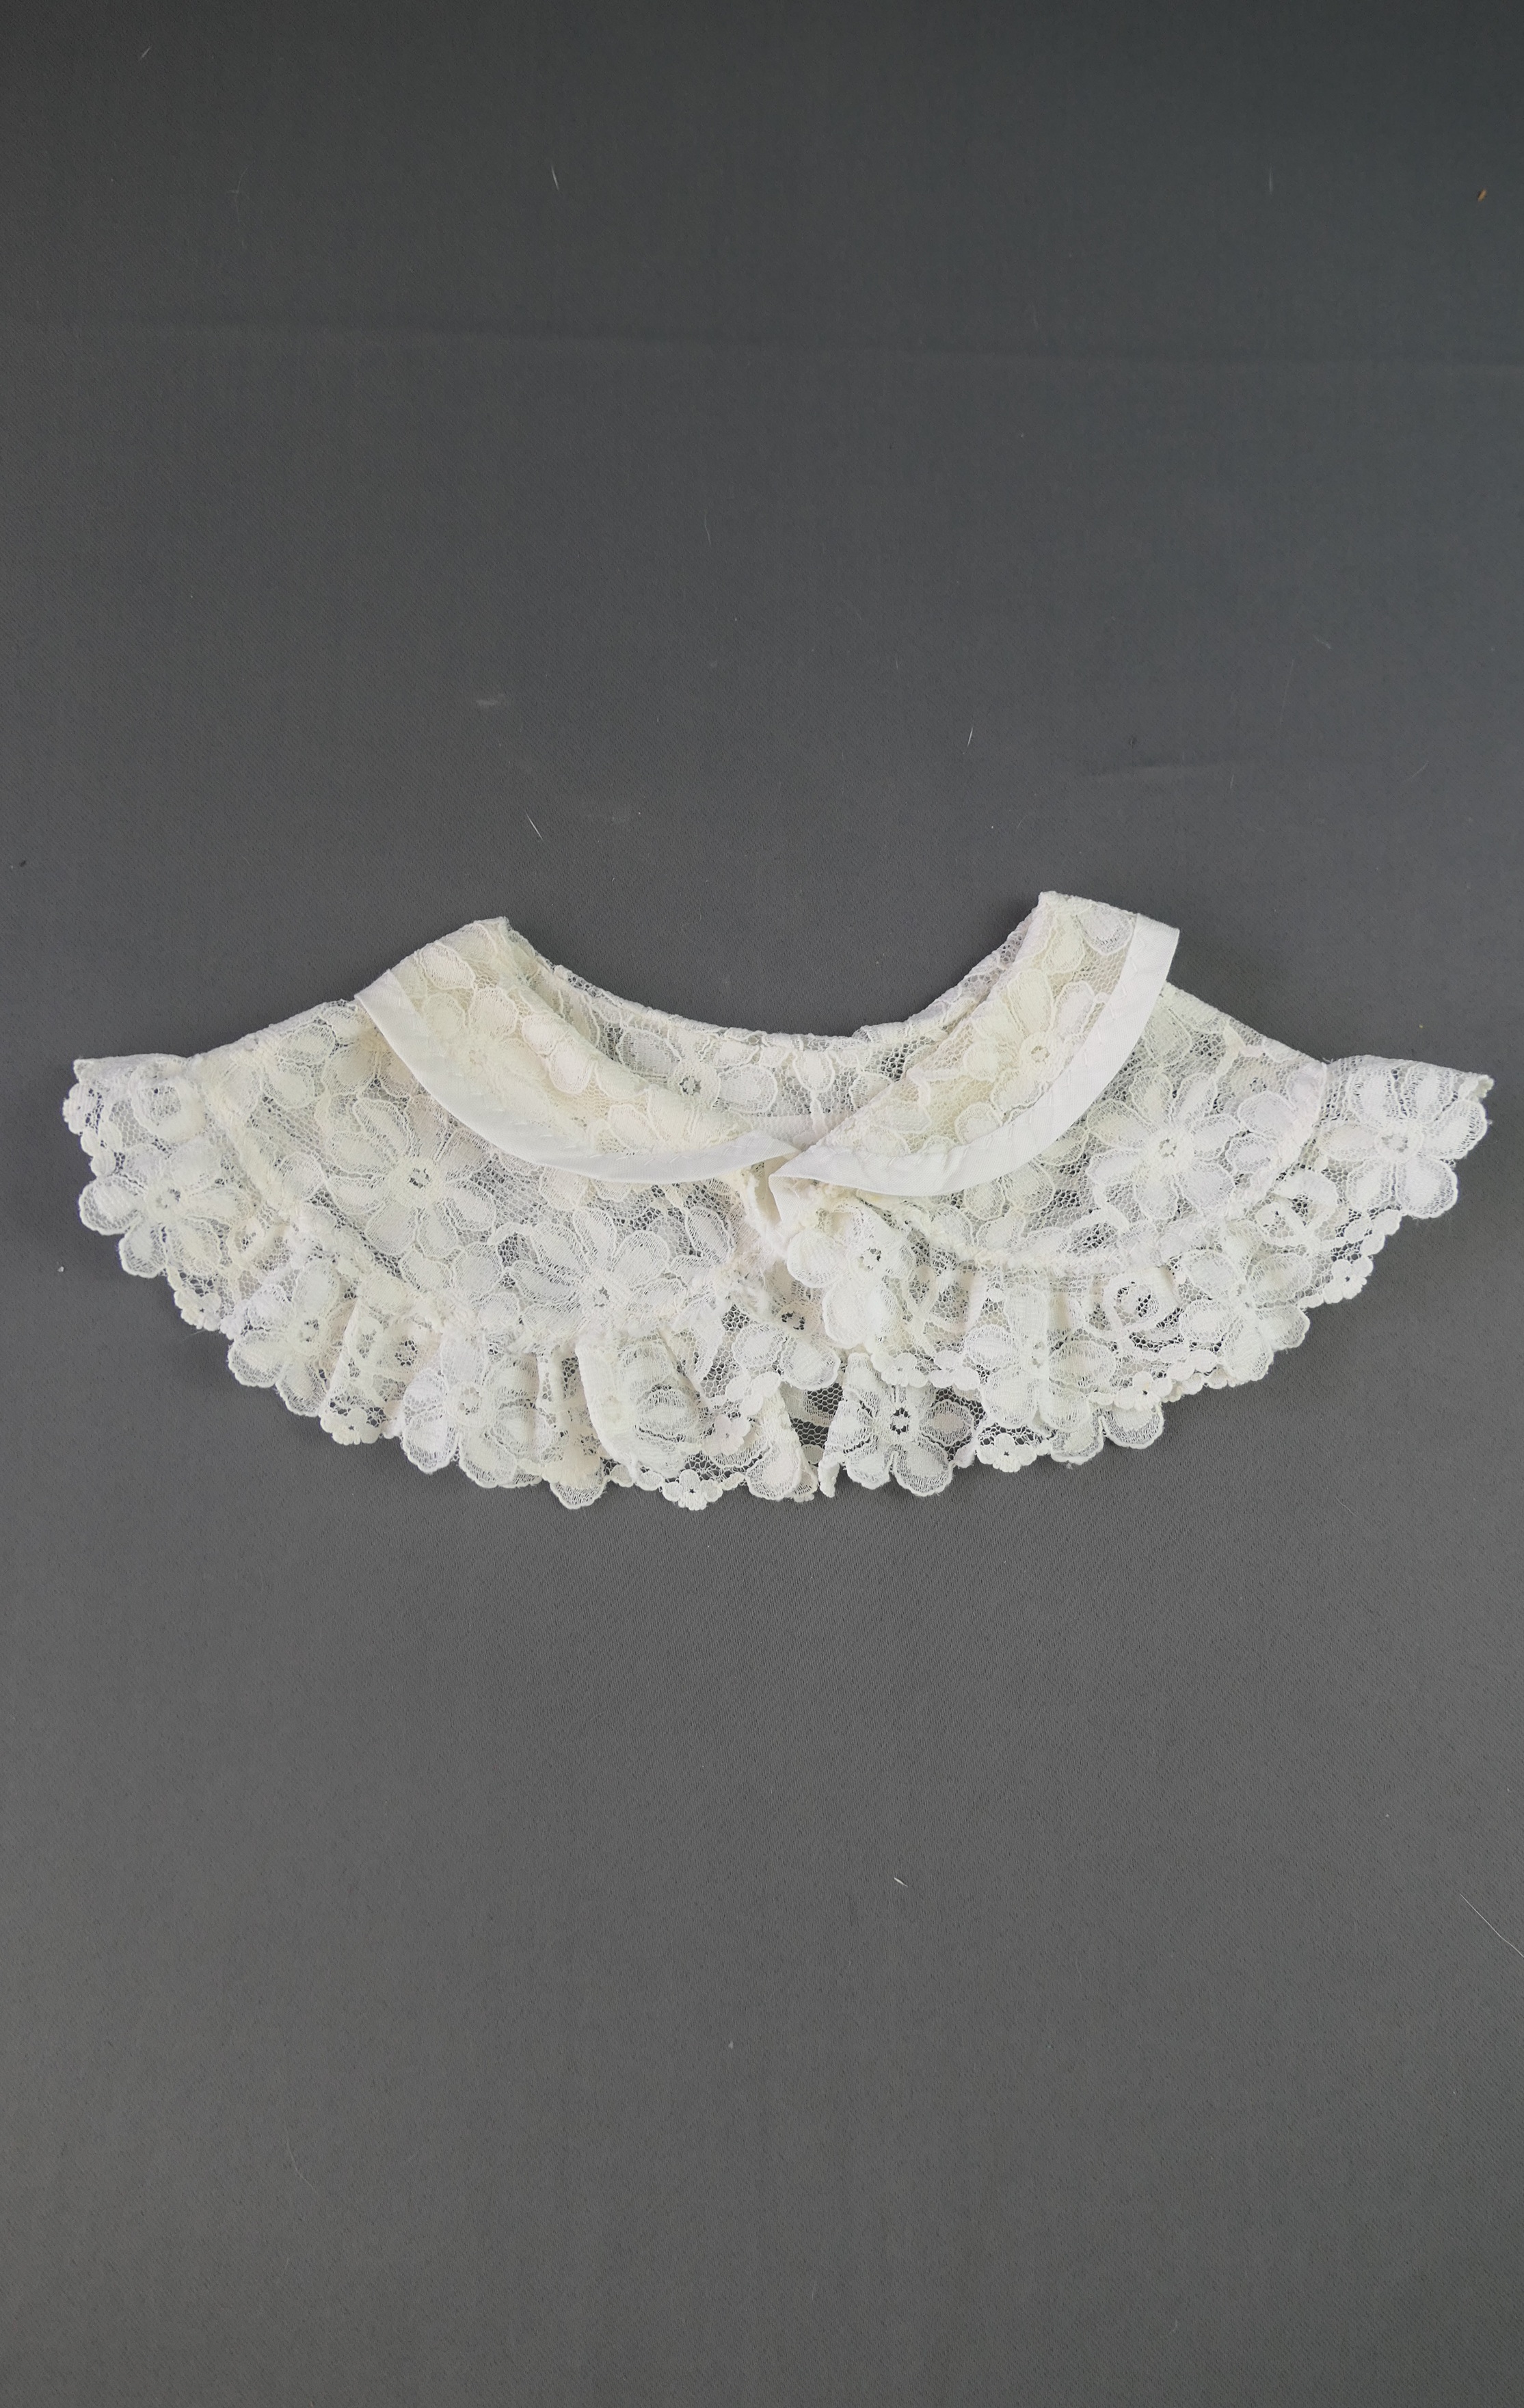 Vintage White Lace Collar for Blouse or Sweater, 2 layers, 1950s 1960s